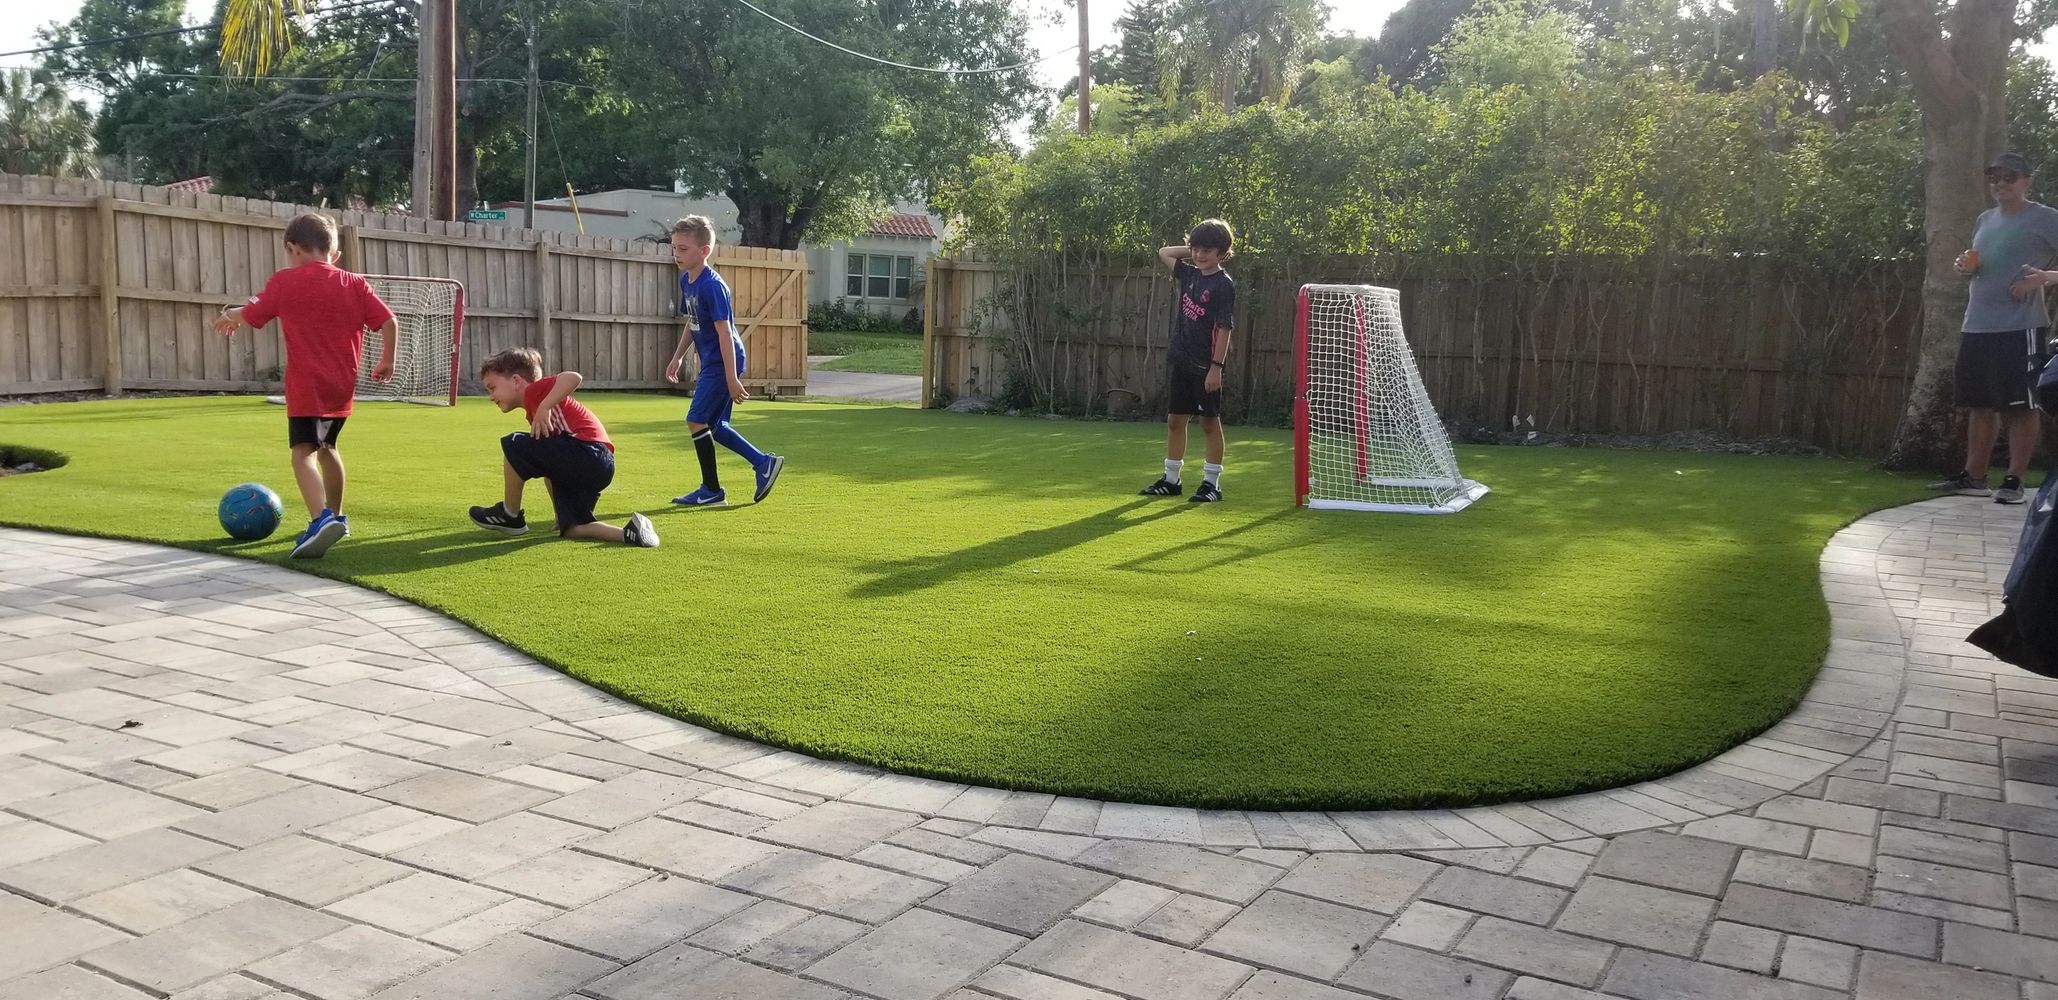 Artificial Grass is great for kids and pets and it looks great too.